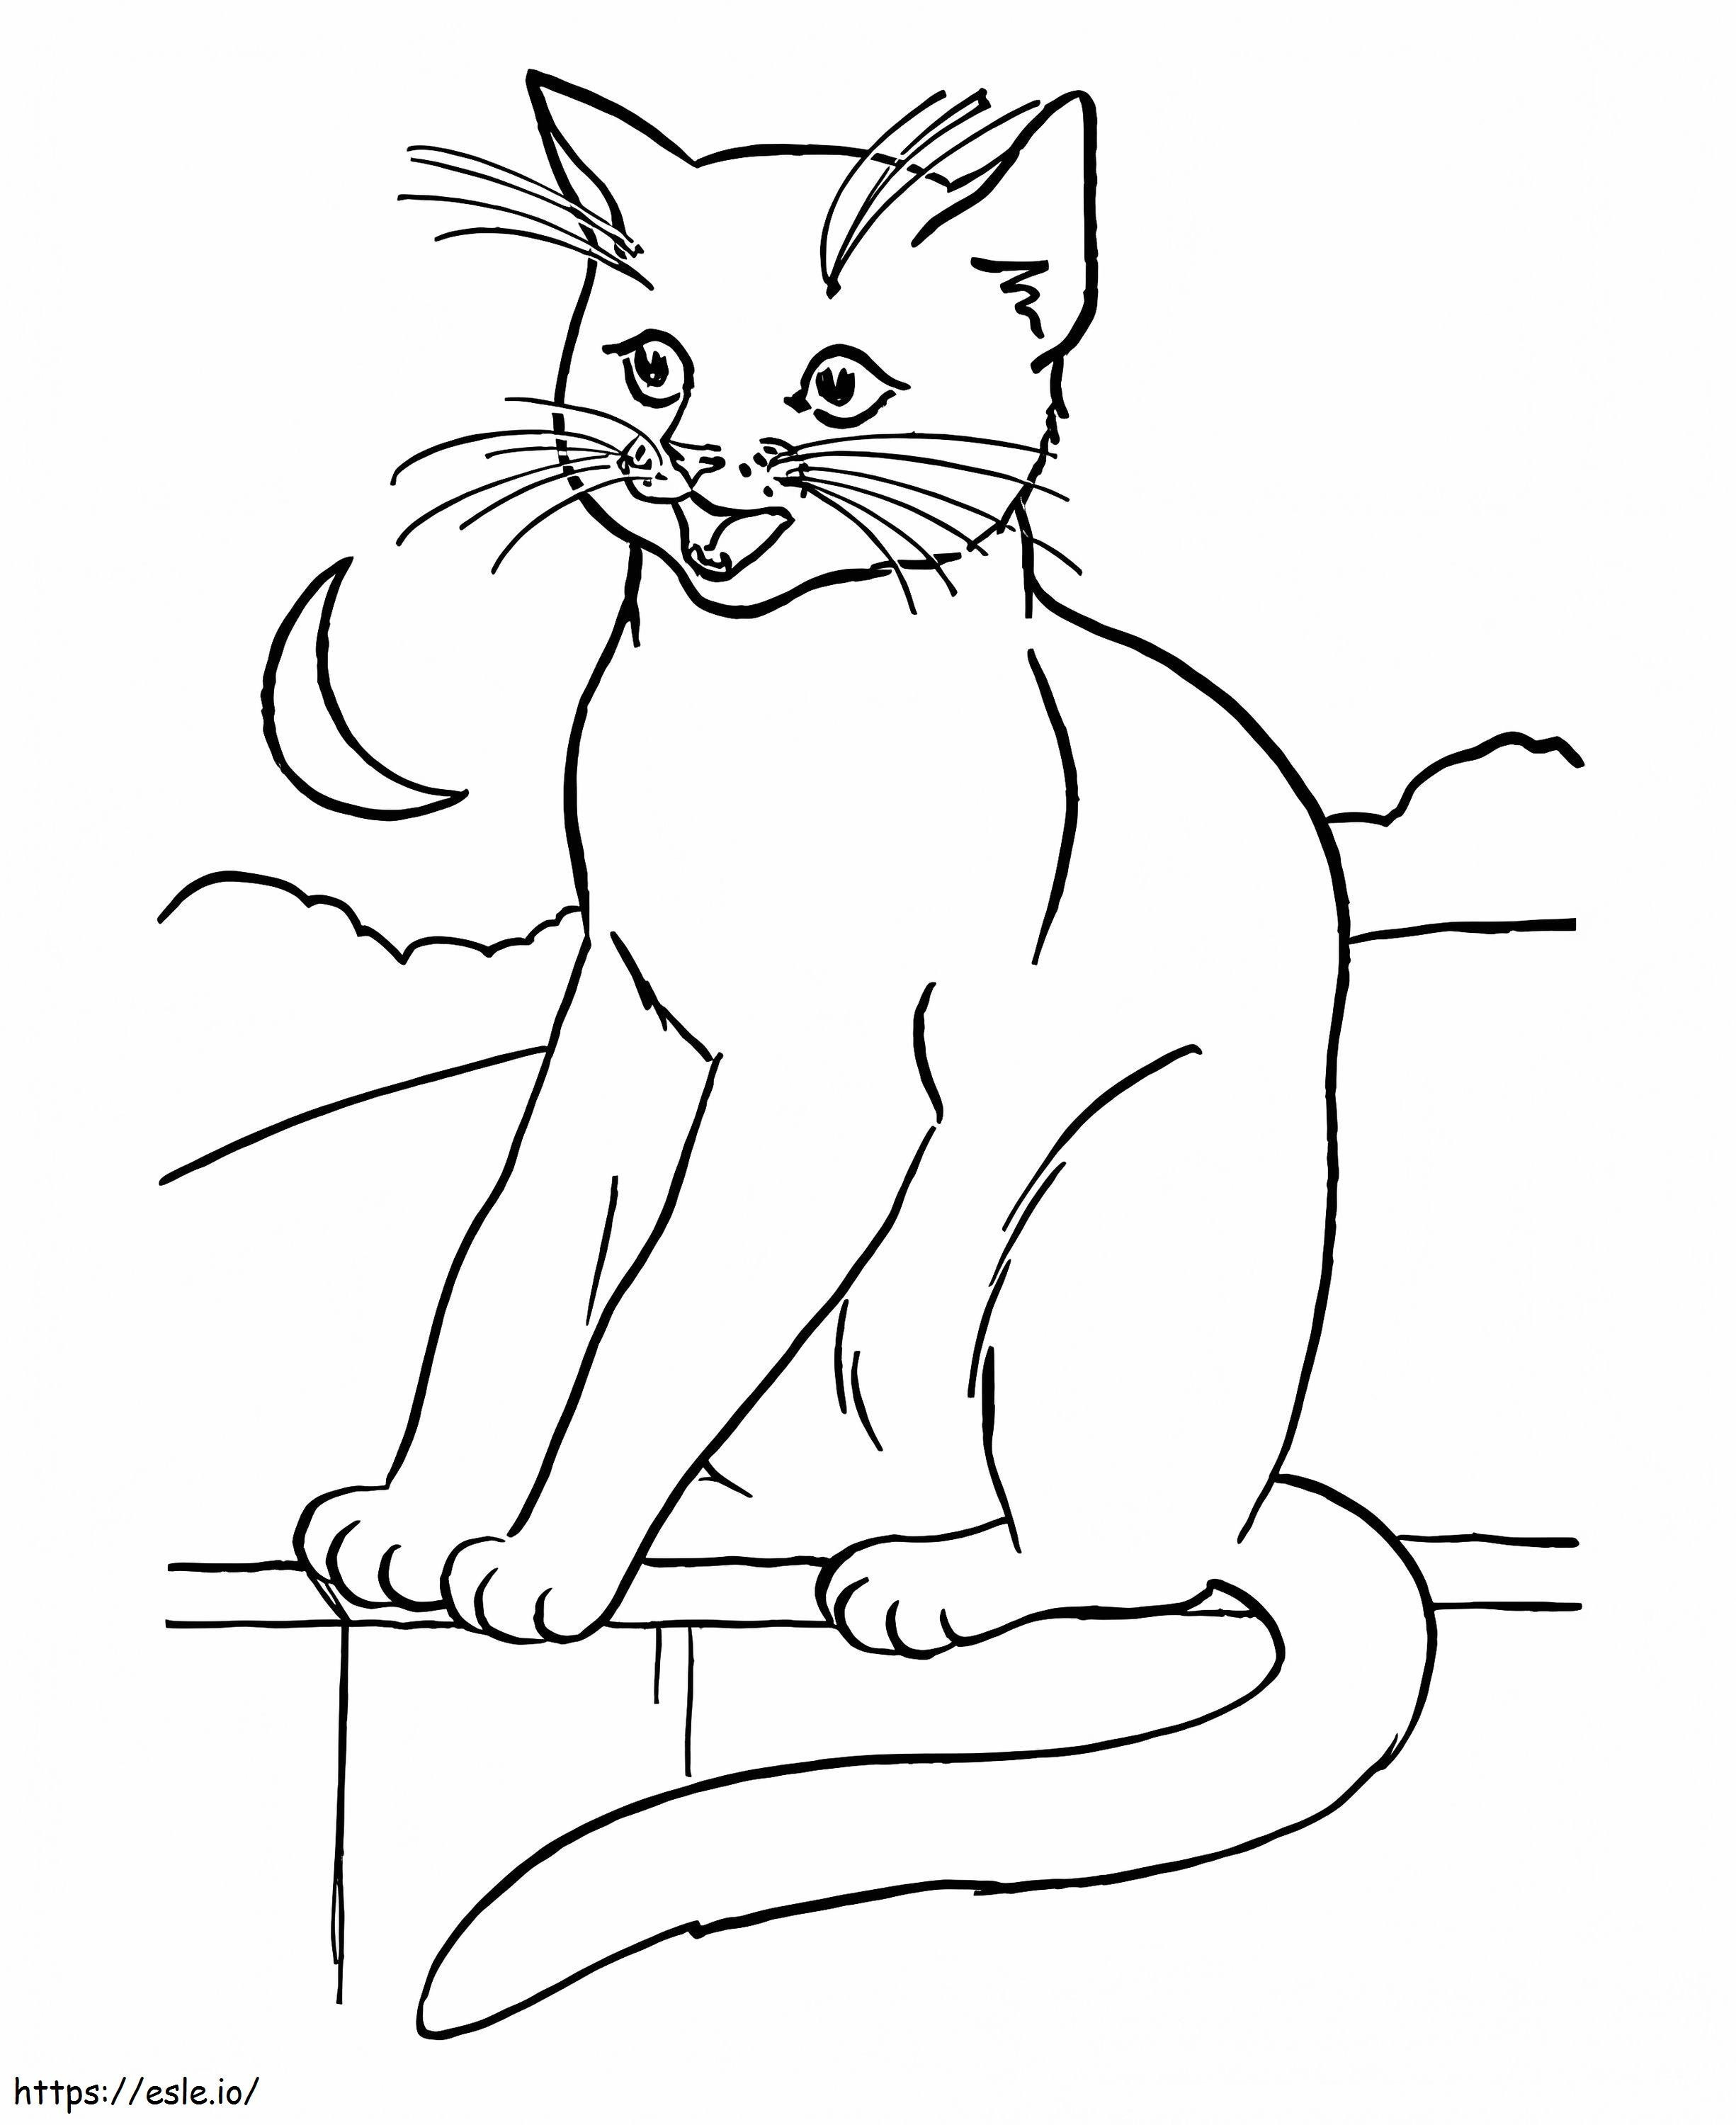 Cat Printable coloring page